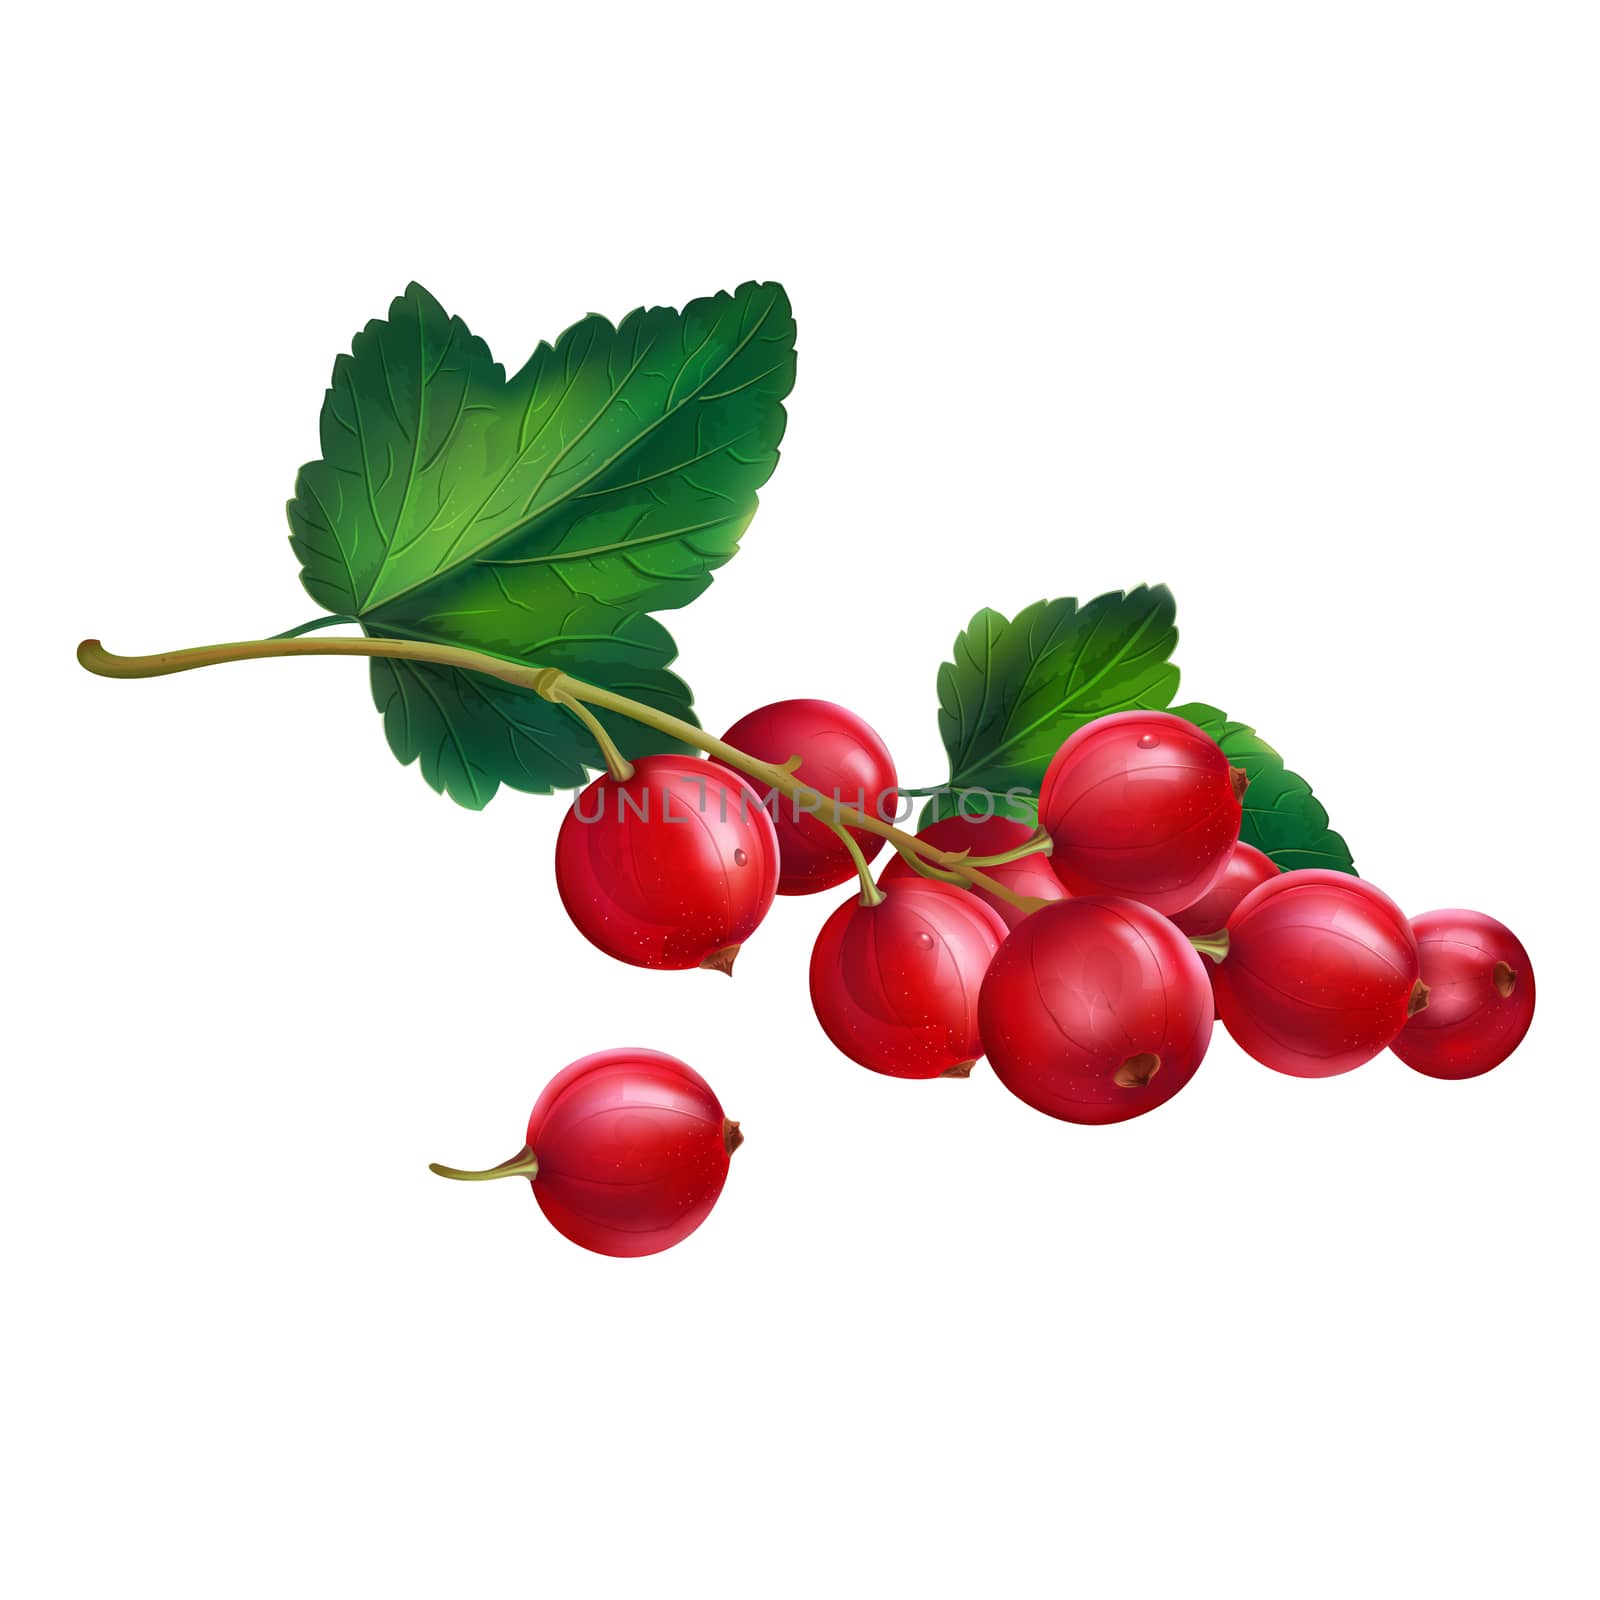 Red currant on white background by ConceptCafe